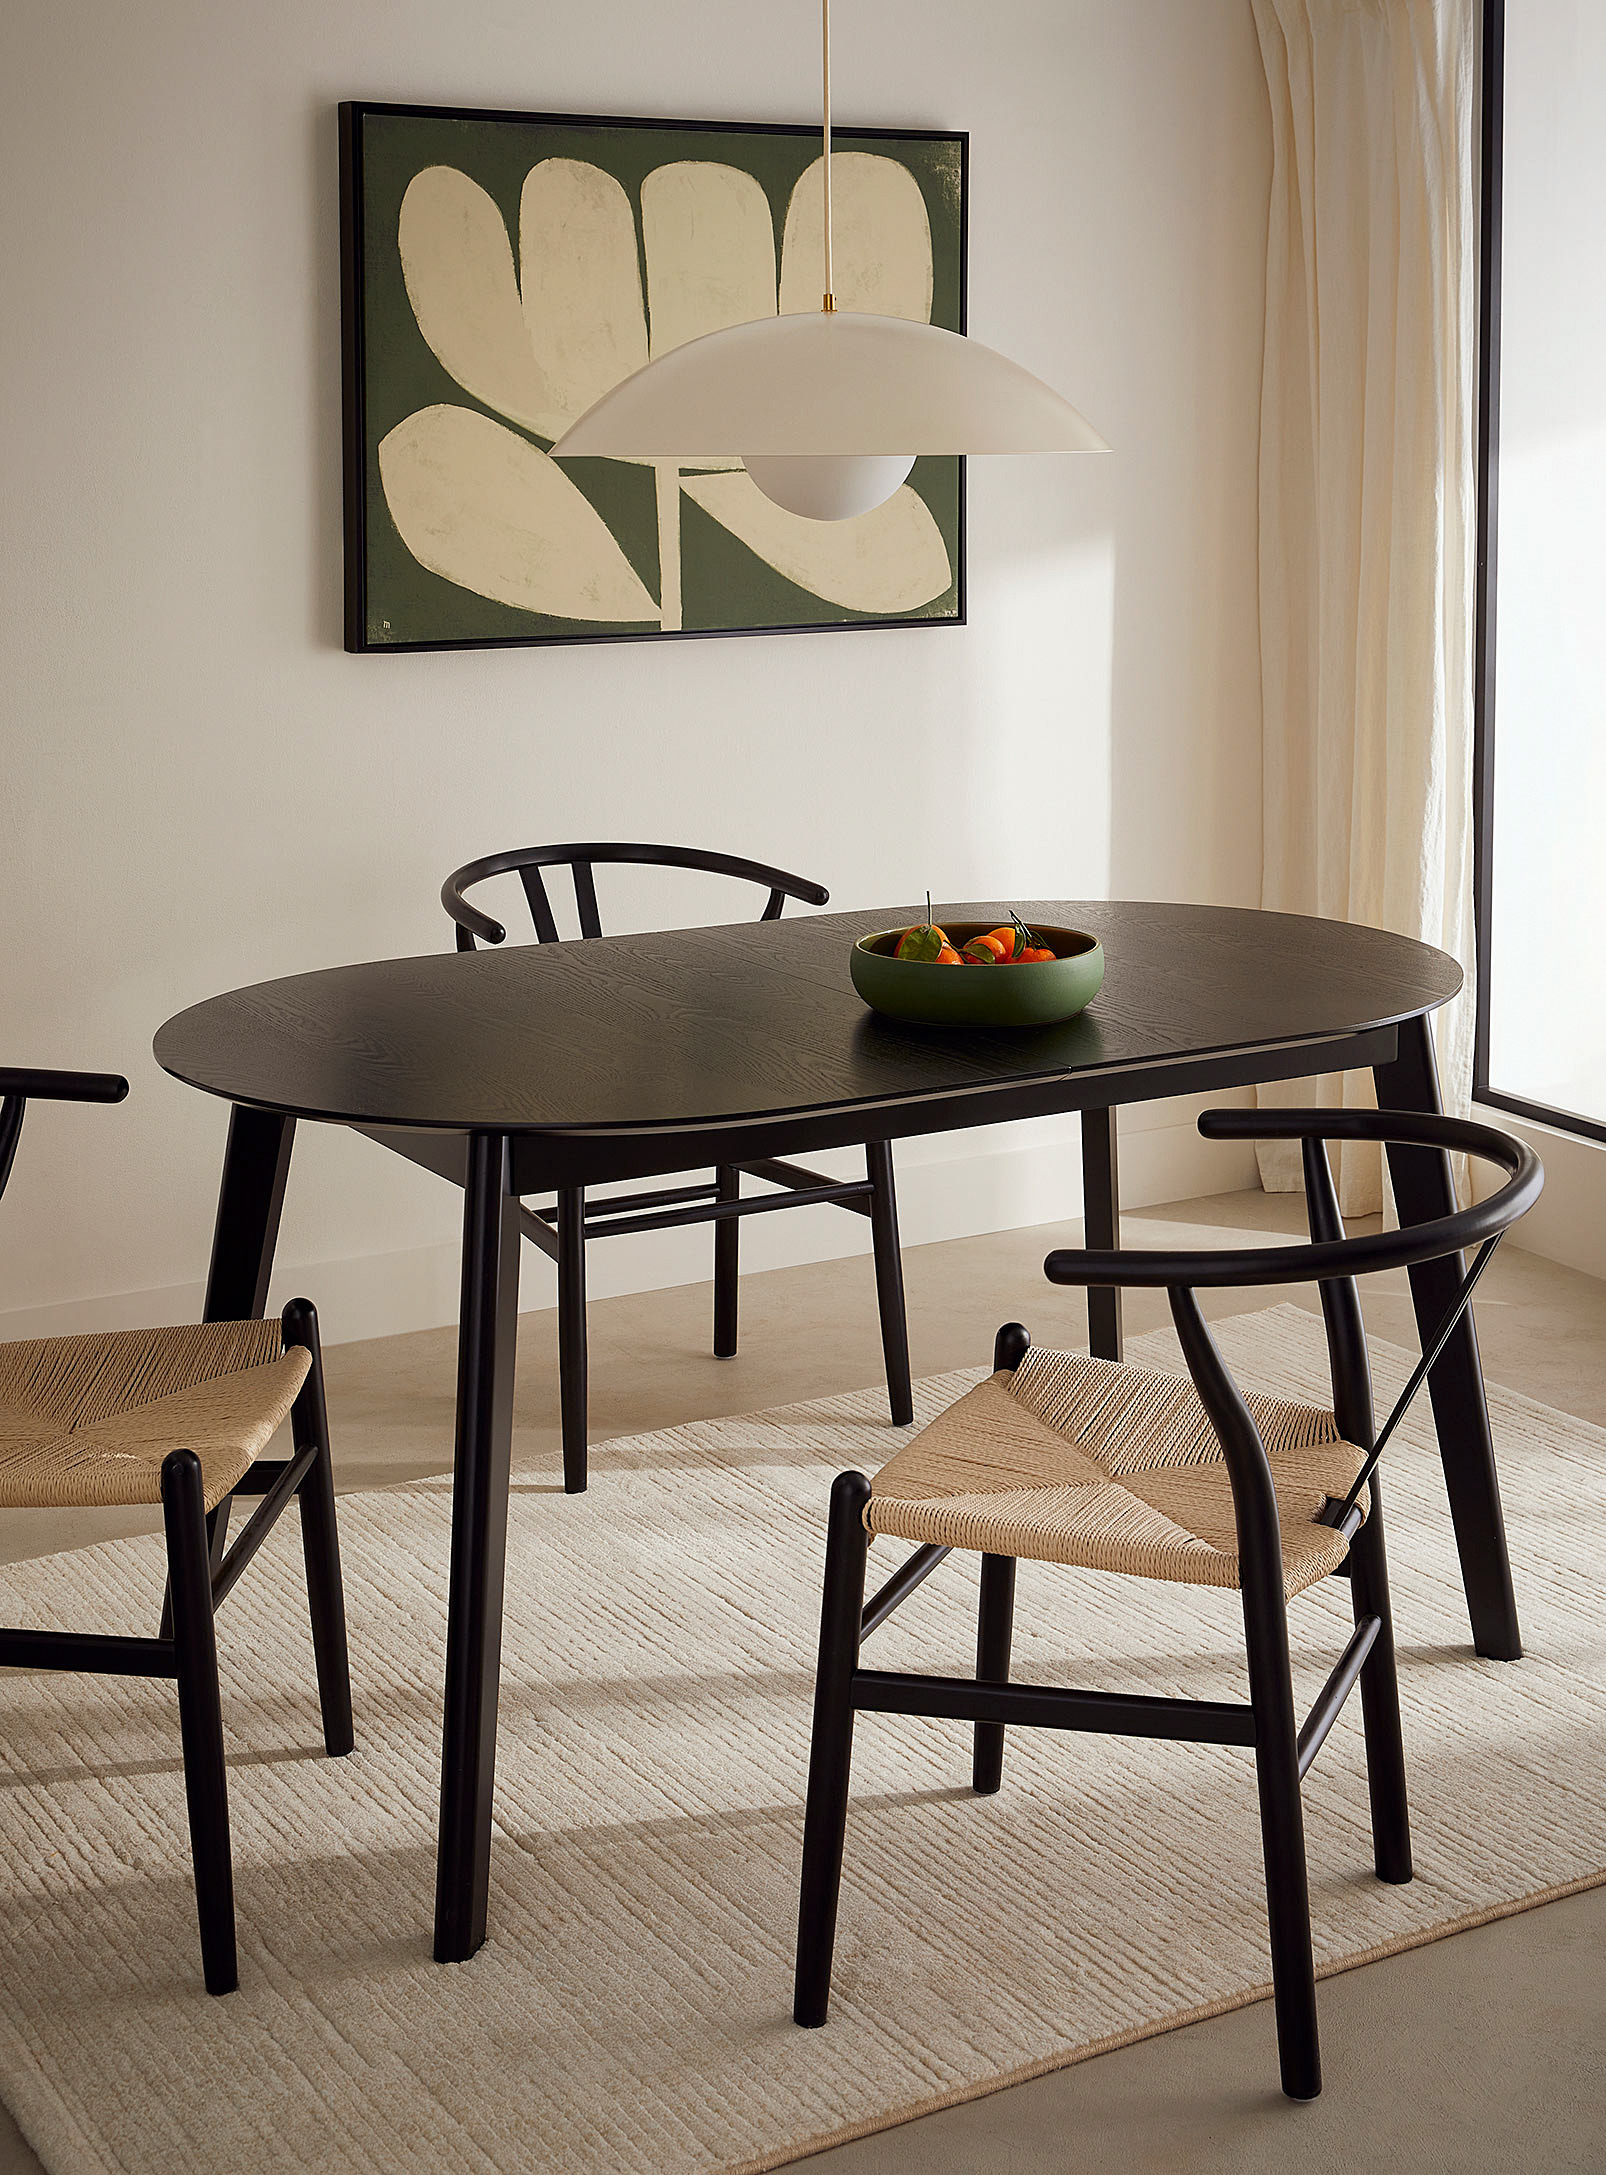 Simons Maison Rounded Wood Table With Extension In Black